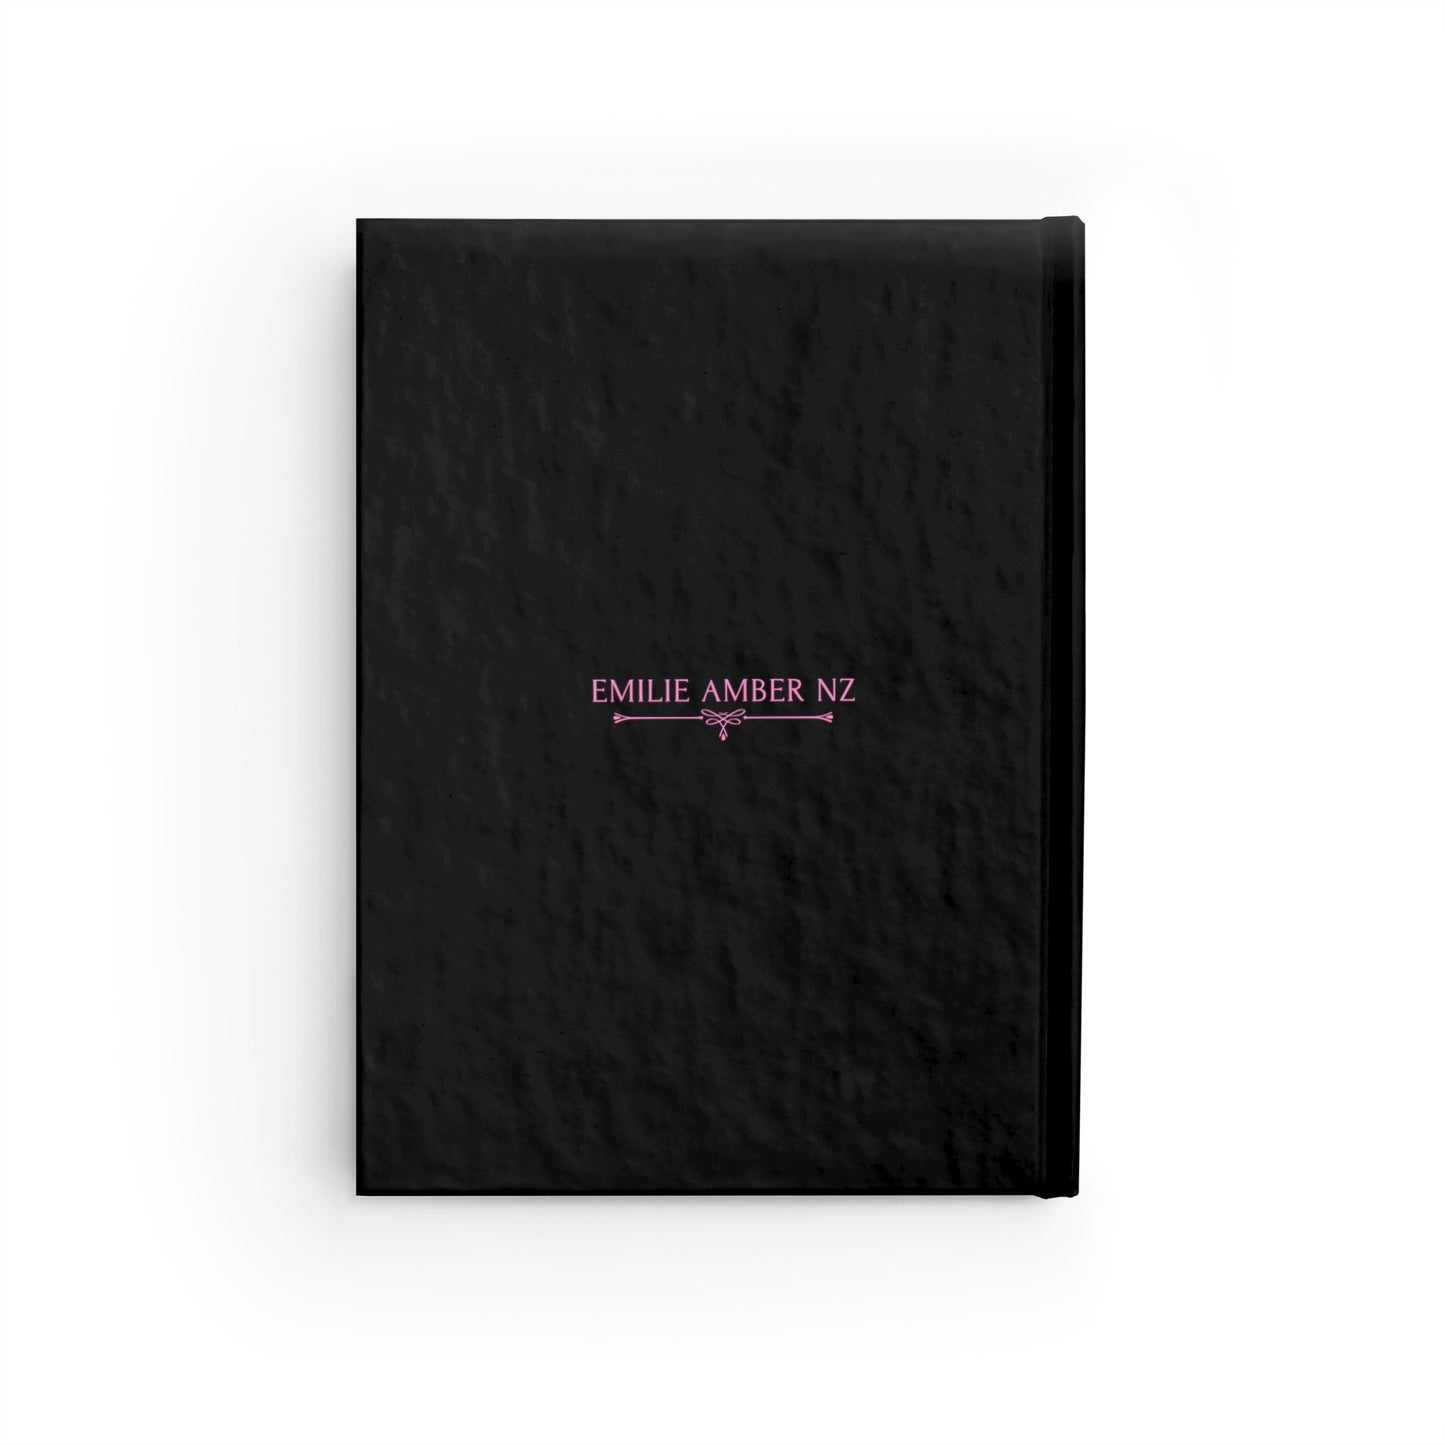 Once Upon A Fantasy - Pink Princess Writing Journal - Ruled Line